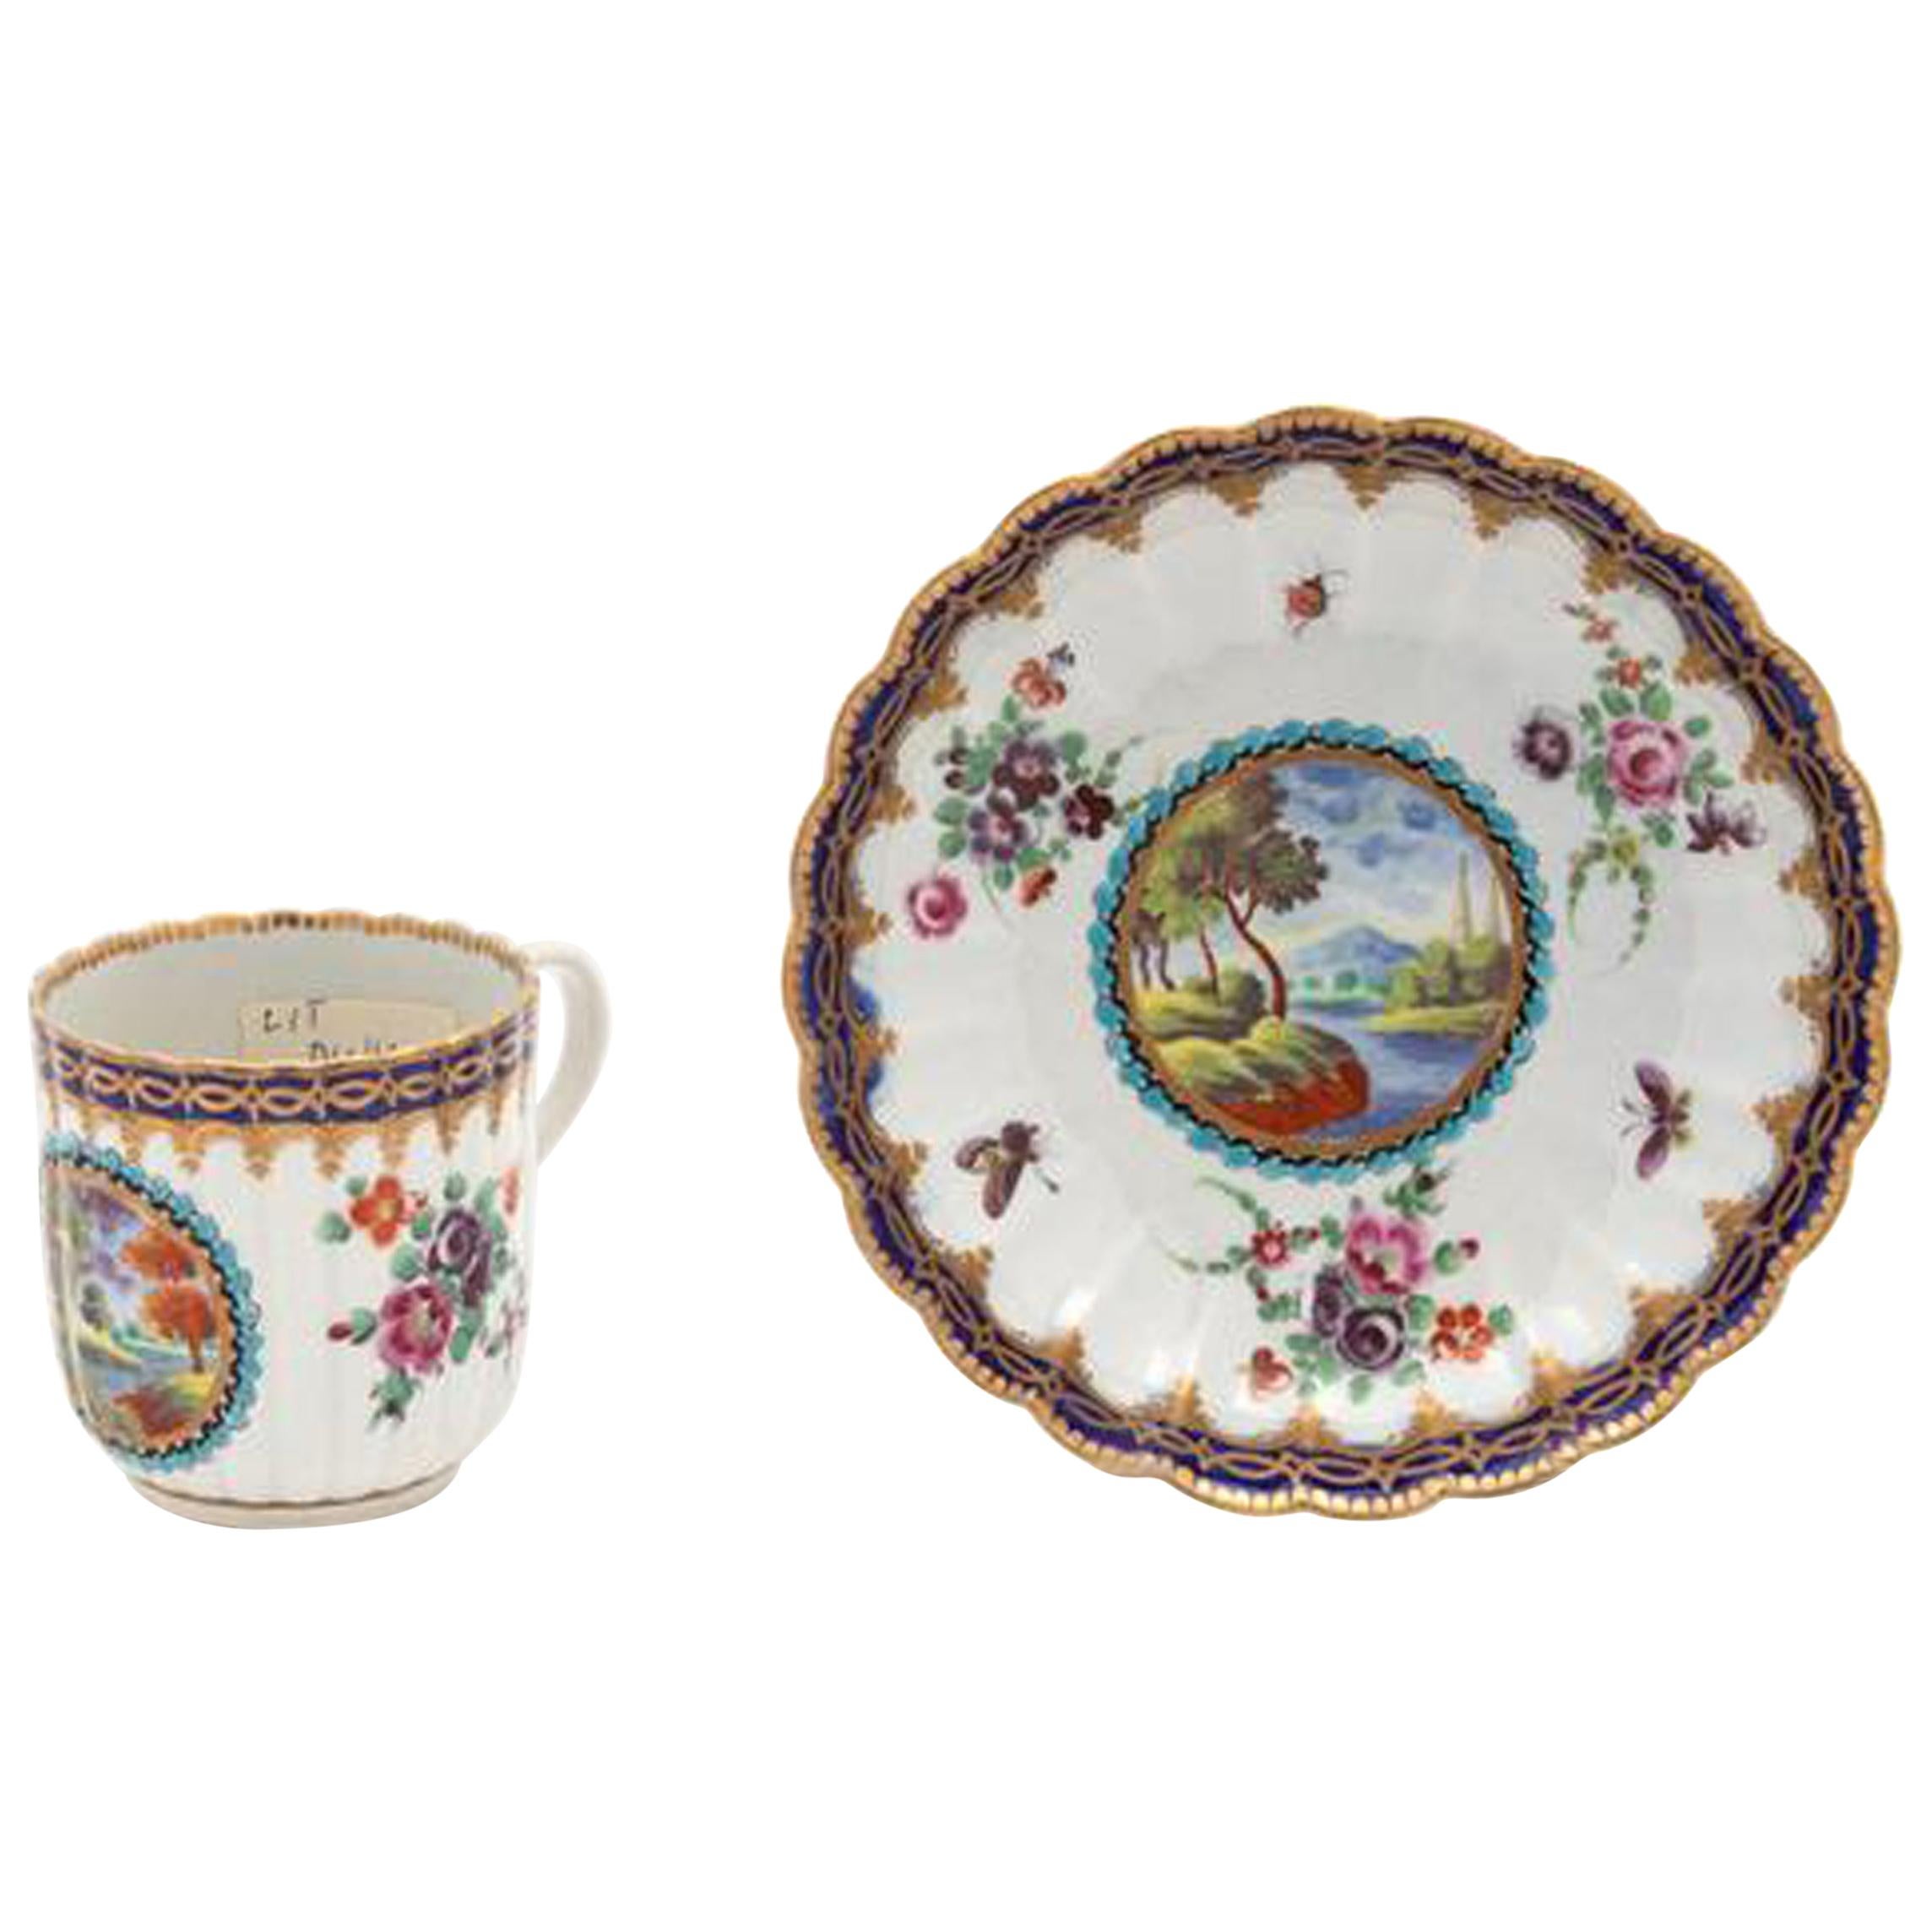 First Period Worcester Porcelain Coffee Can and Saucer, circa 1772-1775